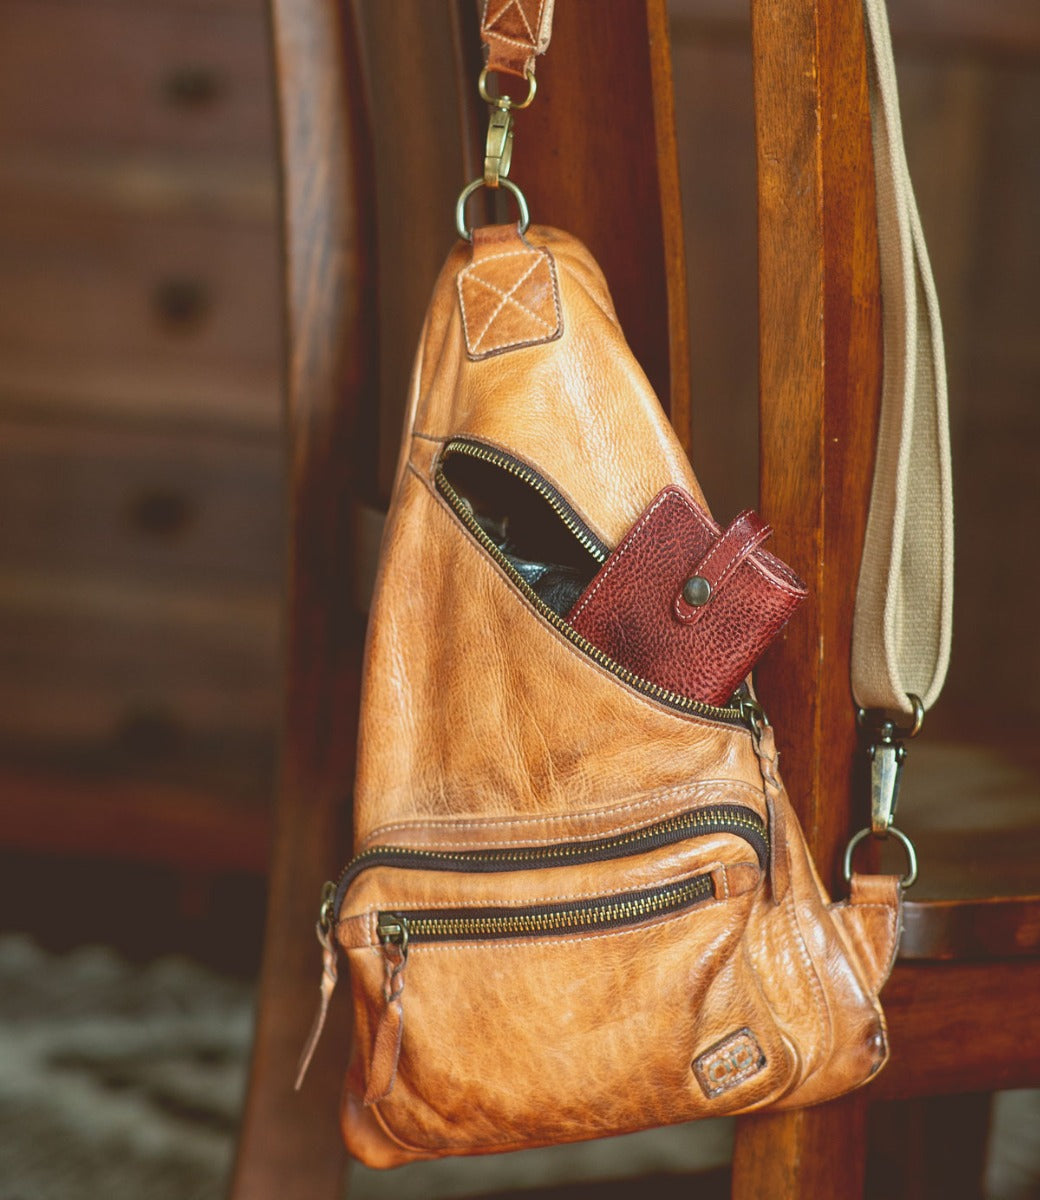 A brown leather Behold sling bag hanging on a chair from the Bed Stu brand.